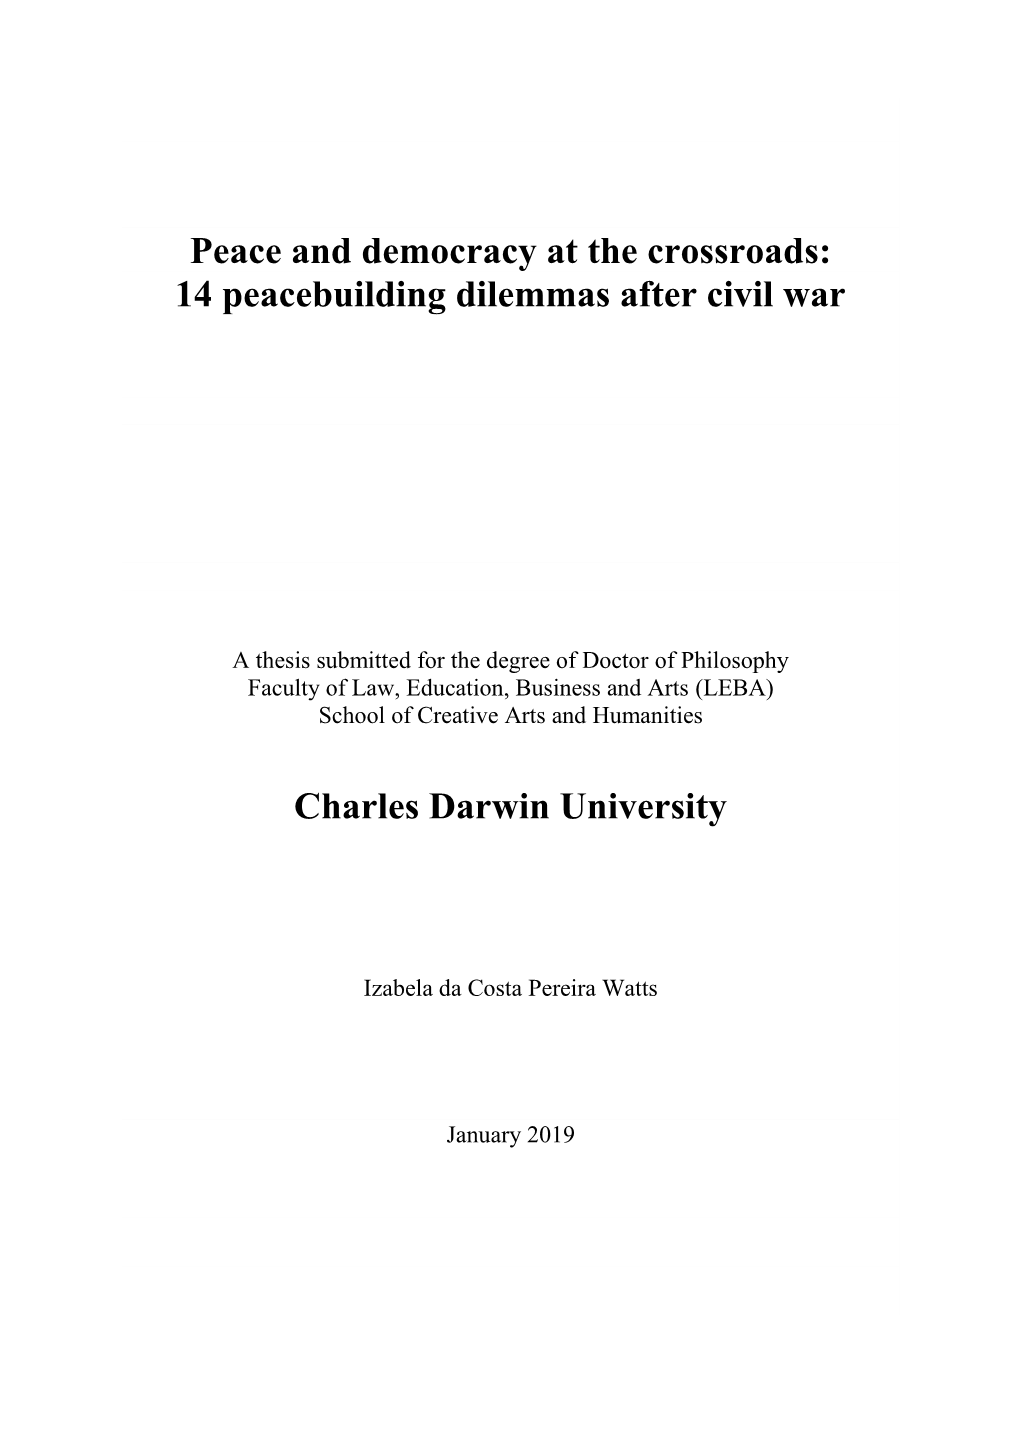 Peace and Democracy at the Crossroads: 14 Peacebuilding Dilemmas After Civil War